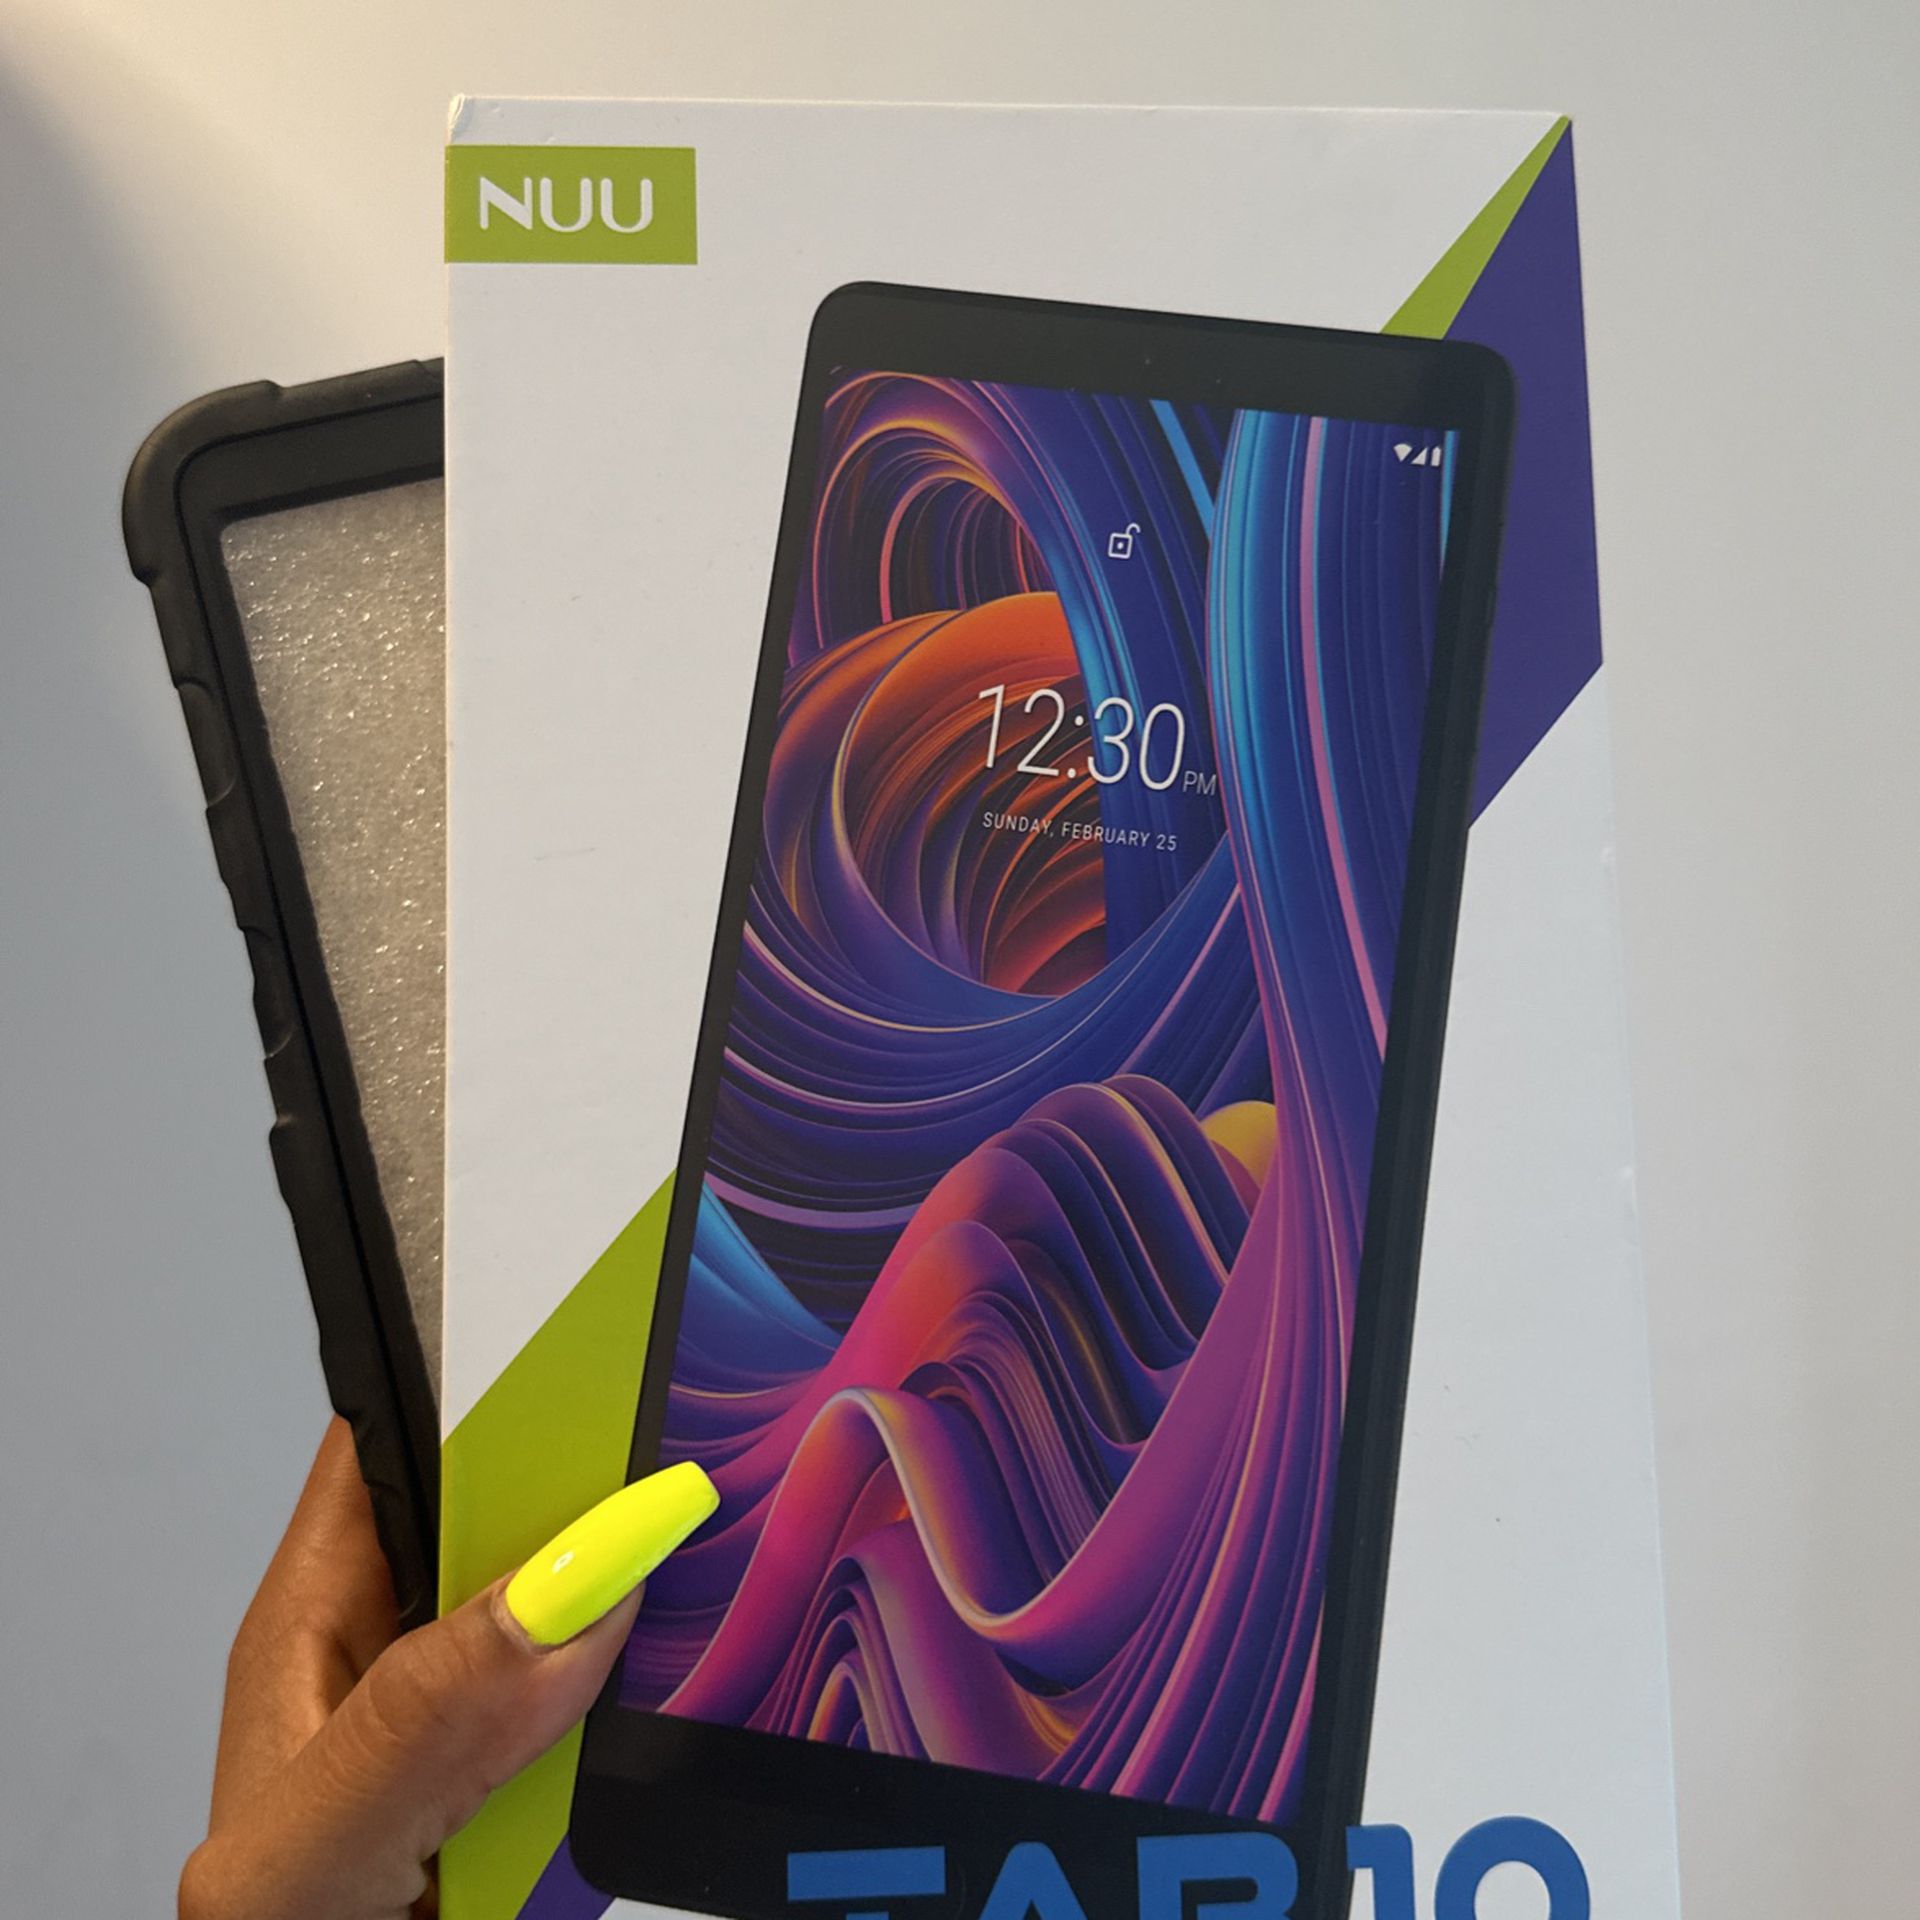 Nuu Tablet And Case 